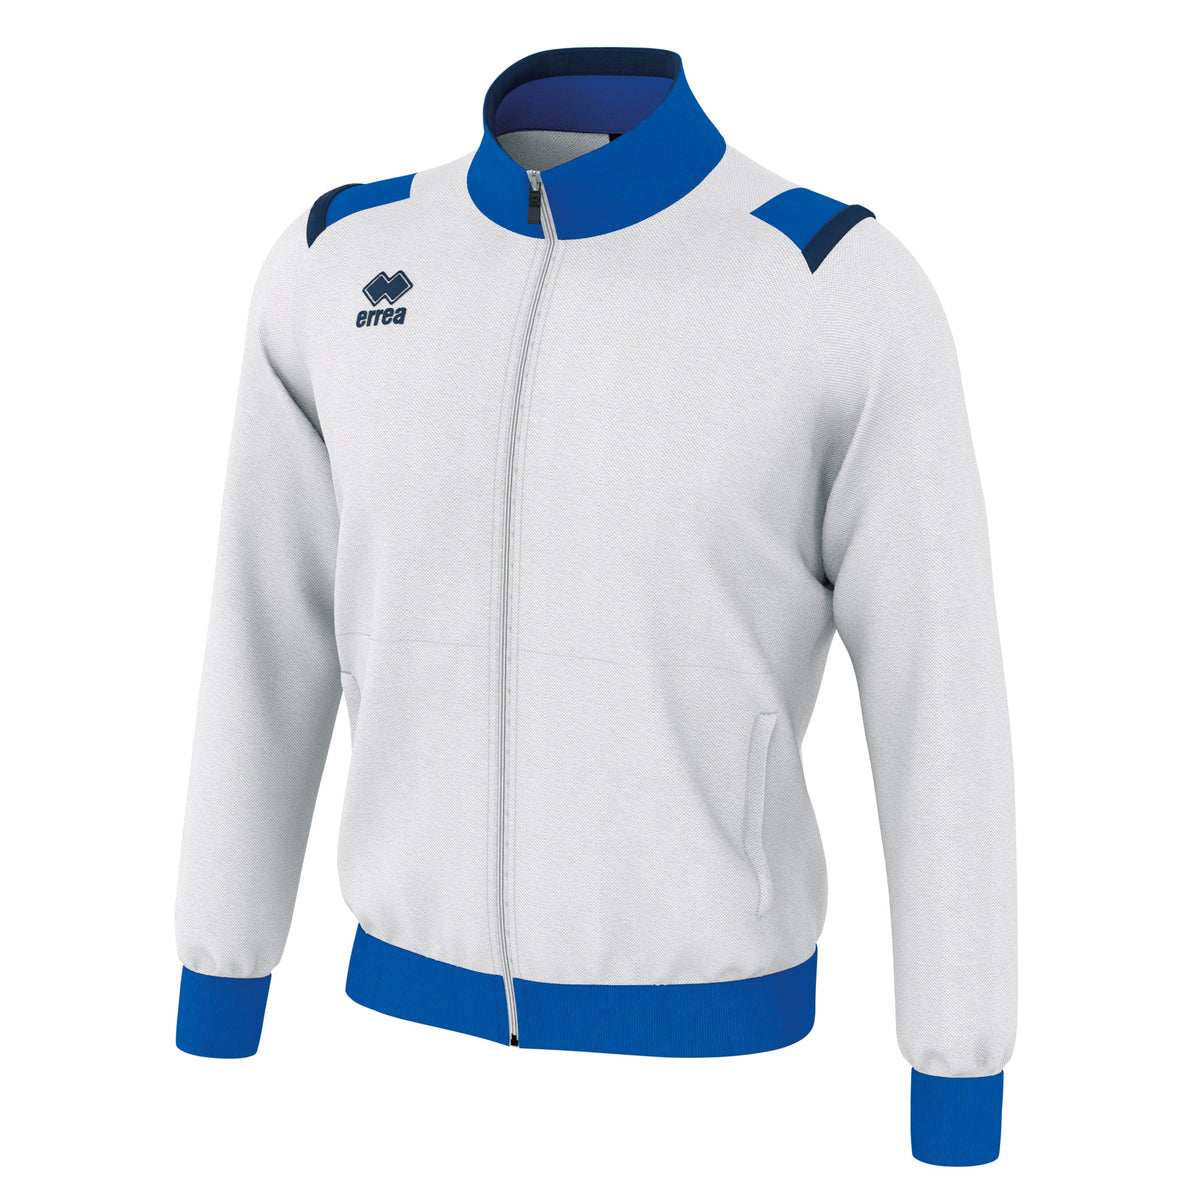 Lou Flann Tracksuit Set in Adult